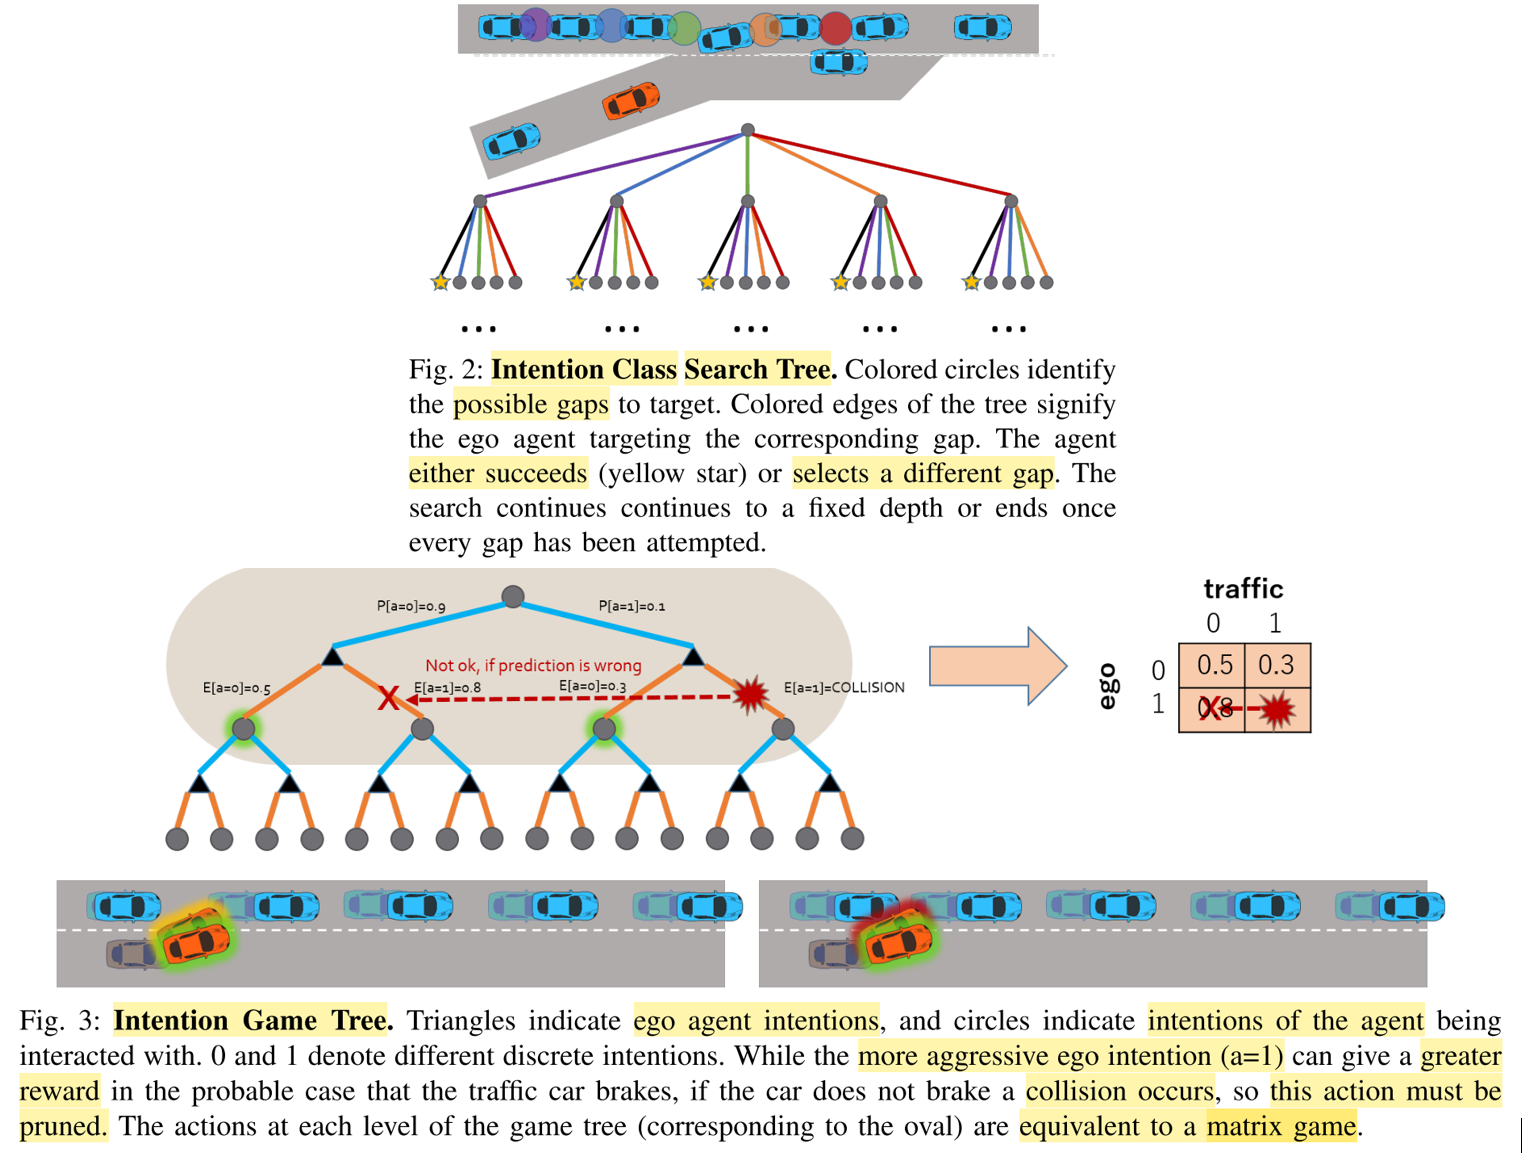 Two tree searches are performed: The first step is to identify a target merging gap based on the probability of a successful merge for each of them. The second search involves forward simulation and collision checking for multiple ego and traffic intentions. In practice the author found that ''the coarse tree - i.e. with intention only - was sufficient for long term planning and only one intention depth needed to be considered for the fine-grained search''. This reduces this second tree to a matrix game. Source.